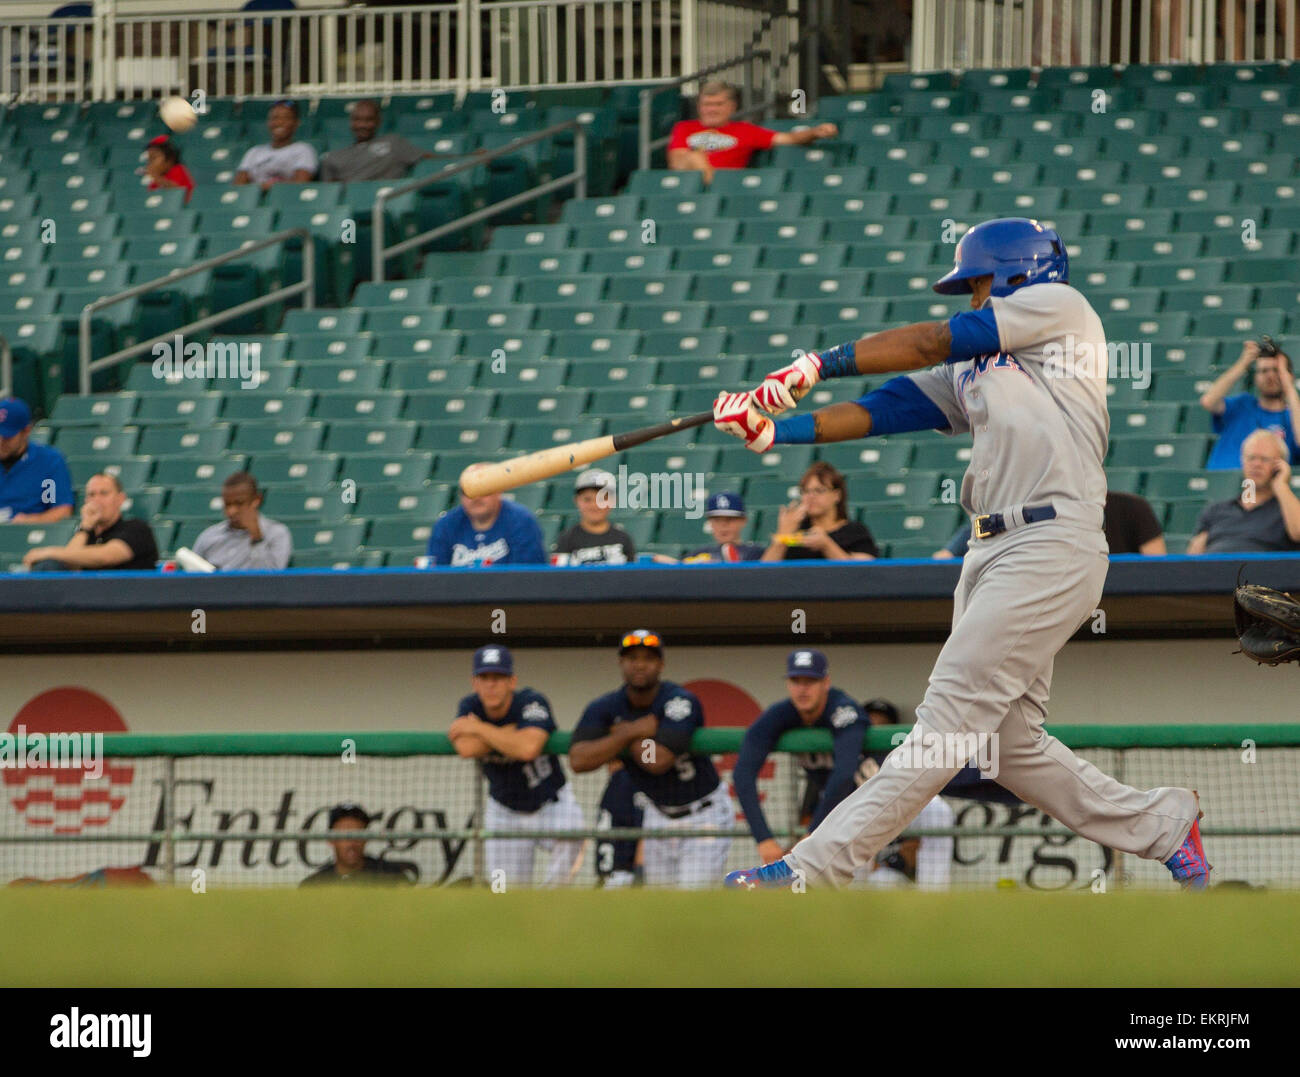 New Orleans, LA, USA. 13th Apr, 2015. Iowa Cubs shortstop Addison Russell (3) hits a single in the first inning during the game between Iowa Cubs and New Orleans Zephyrs at Zephyr Field in New Orleans, LA. Credit:  csm/Alamy Live News Stock Photo